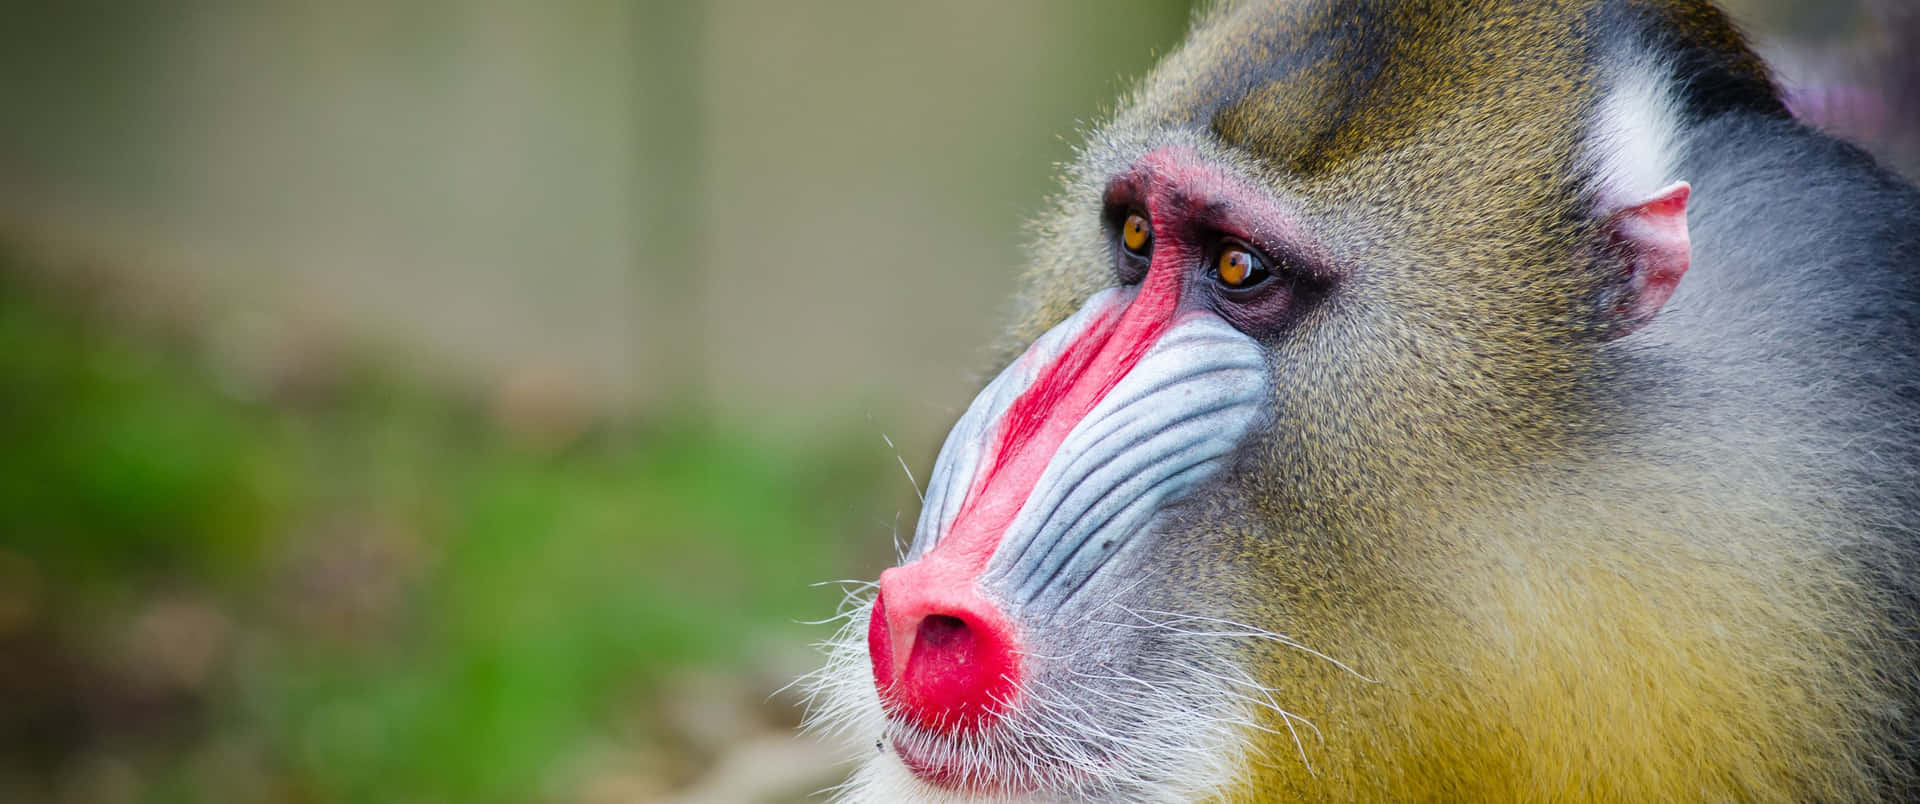 3440x1440 Animal Brown And Beige Mandrill Wallpaper